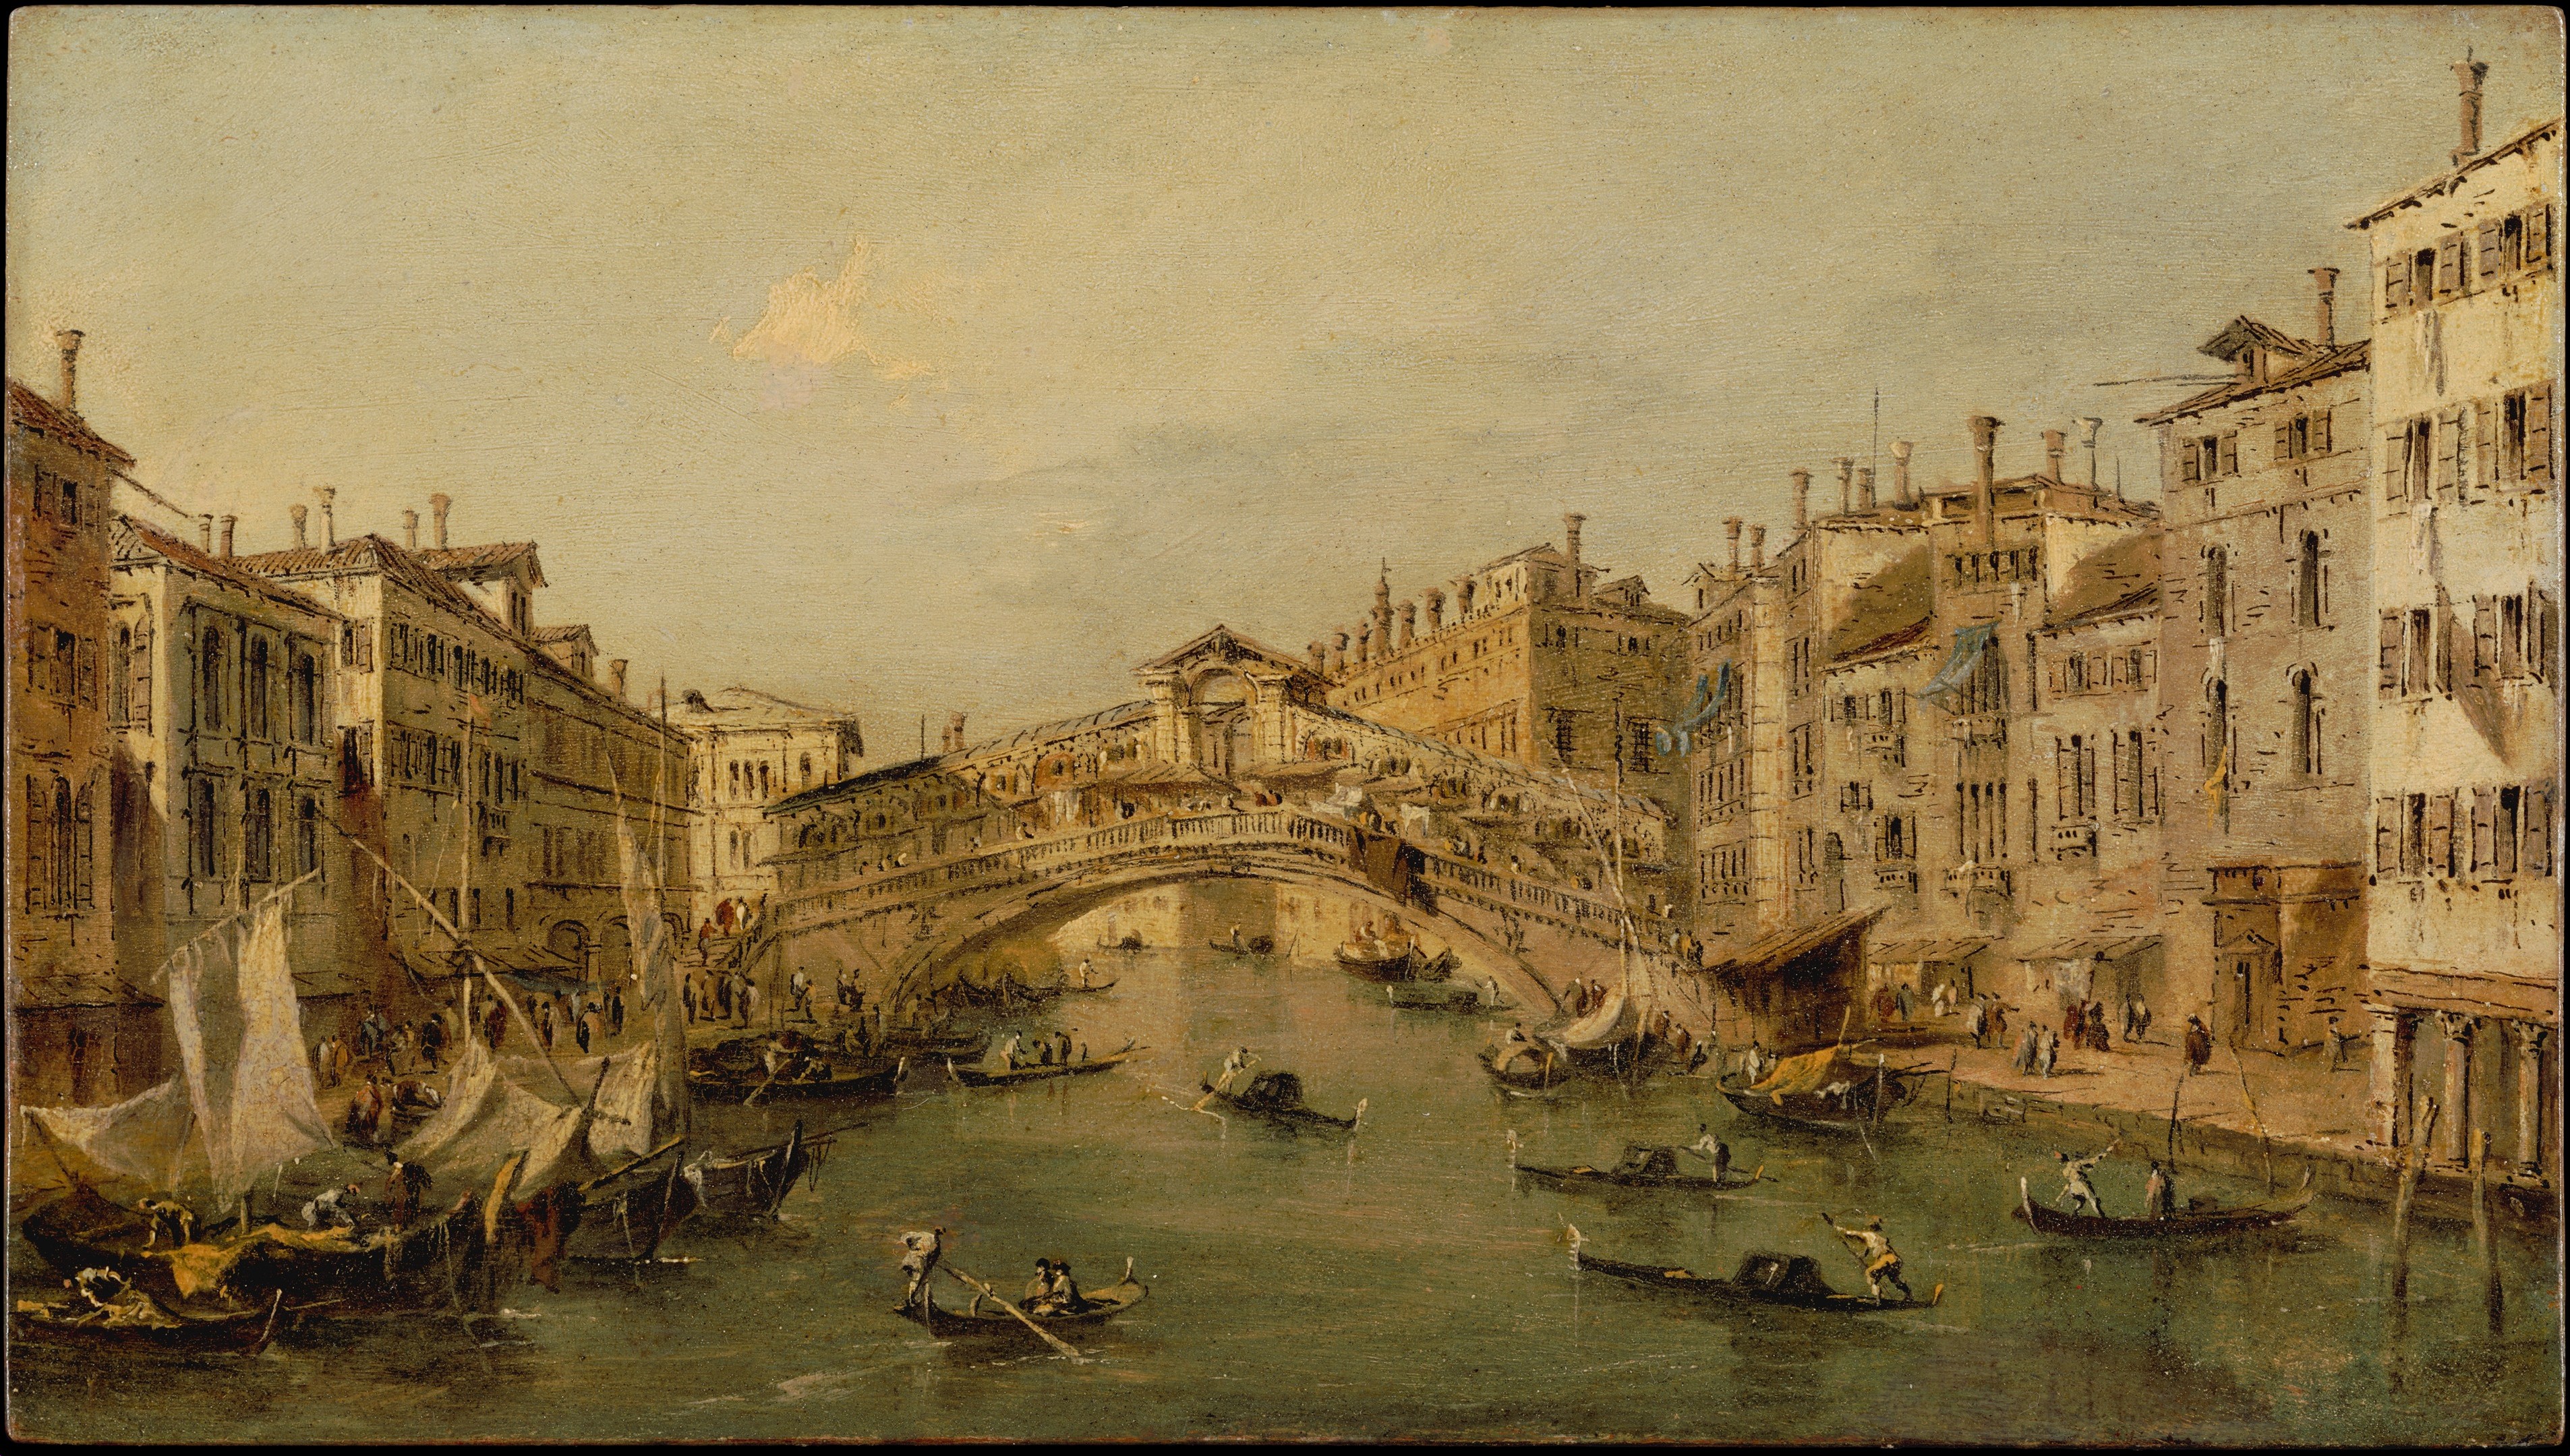 The Majestic Beauty of Rivers Captured in The Metropolitan Museum